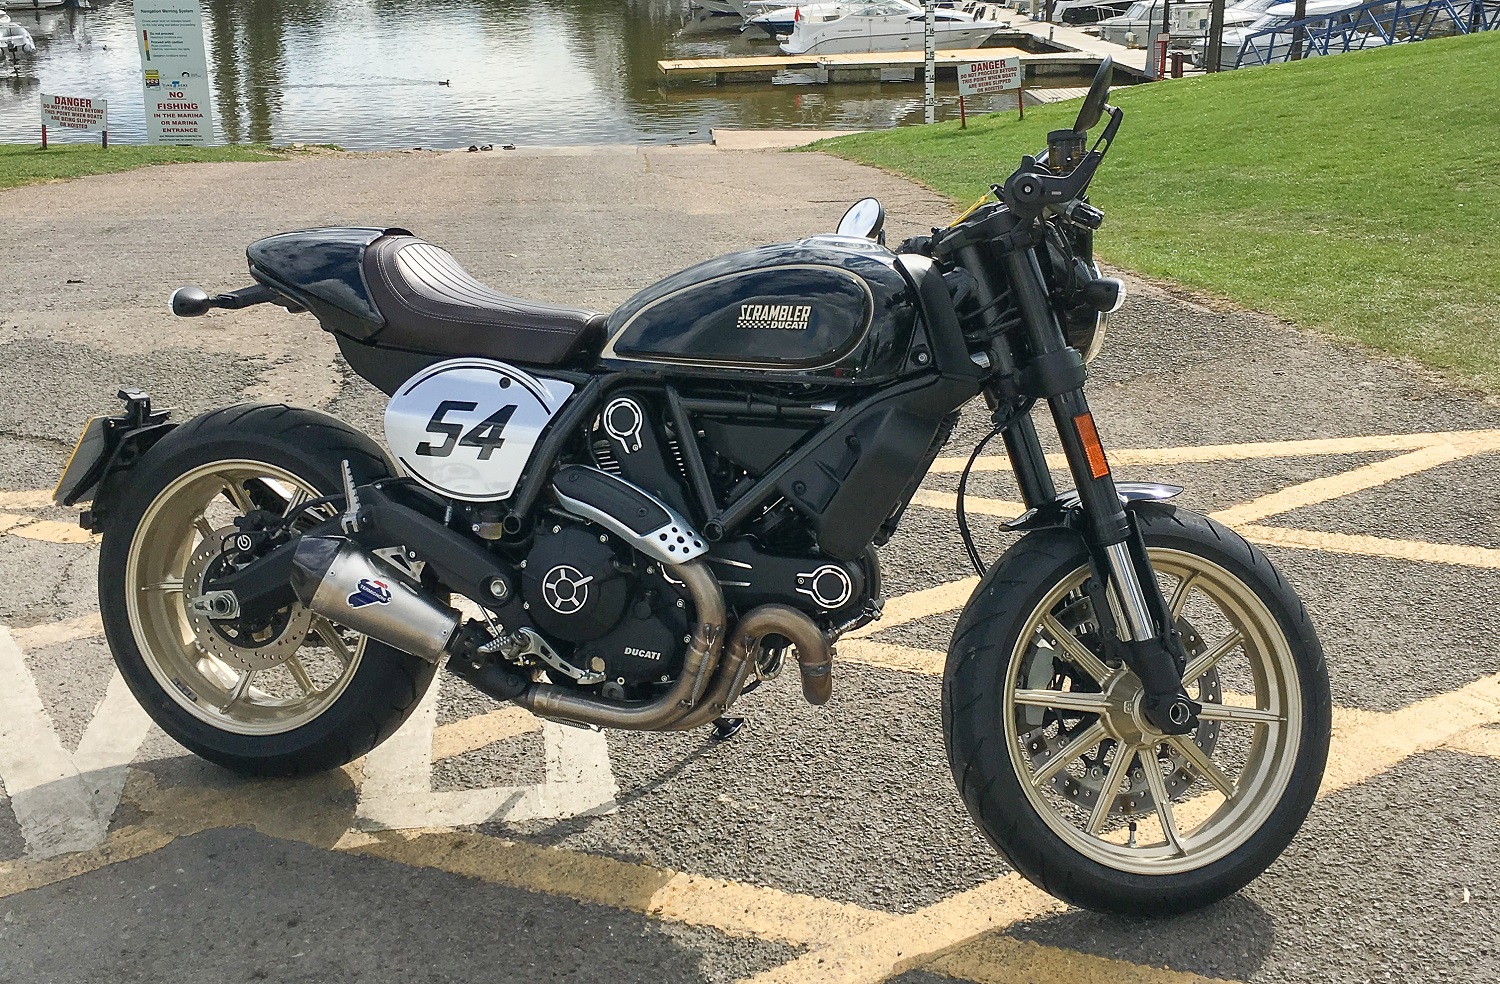 Ducati Scrambler Cafe Racer (2017 On) • For Sale • Price Guide • The ...